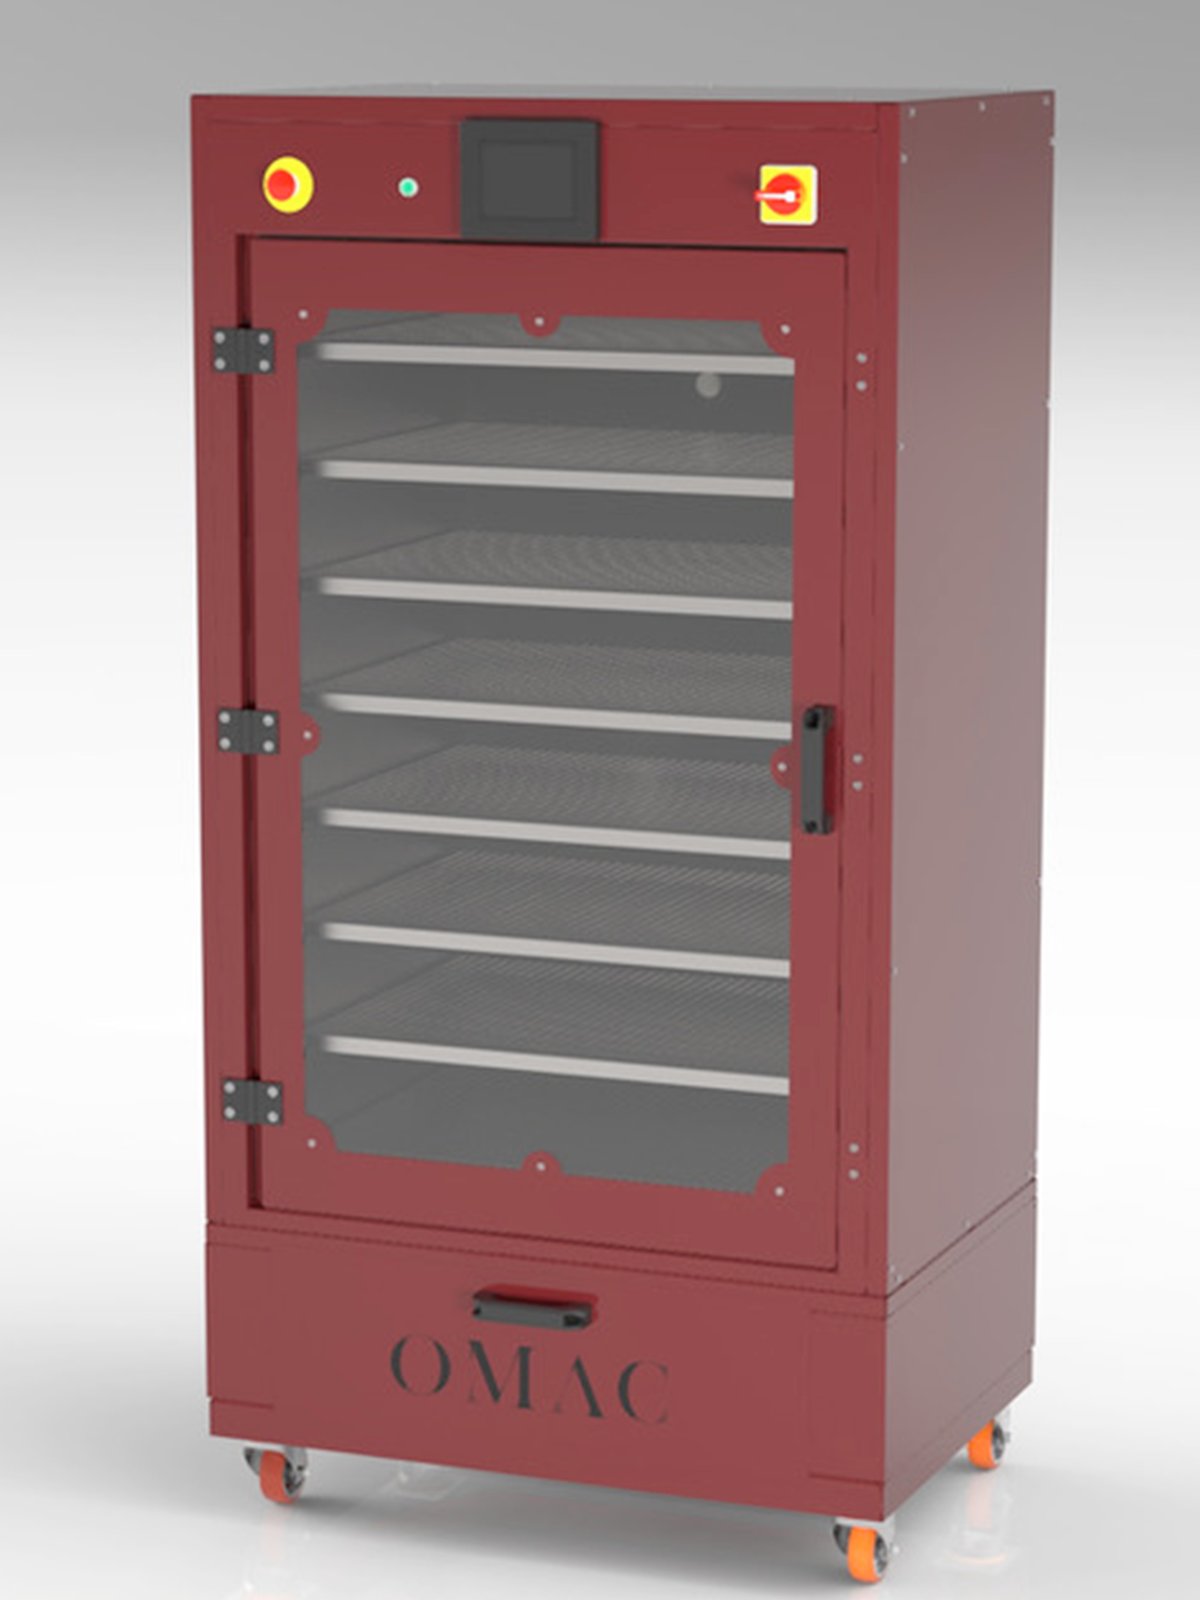 Omac Srl, ergonomic devices, automatic openings and sensors to improve quality and safety